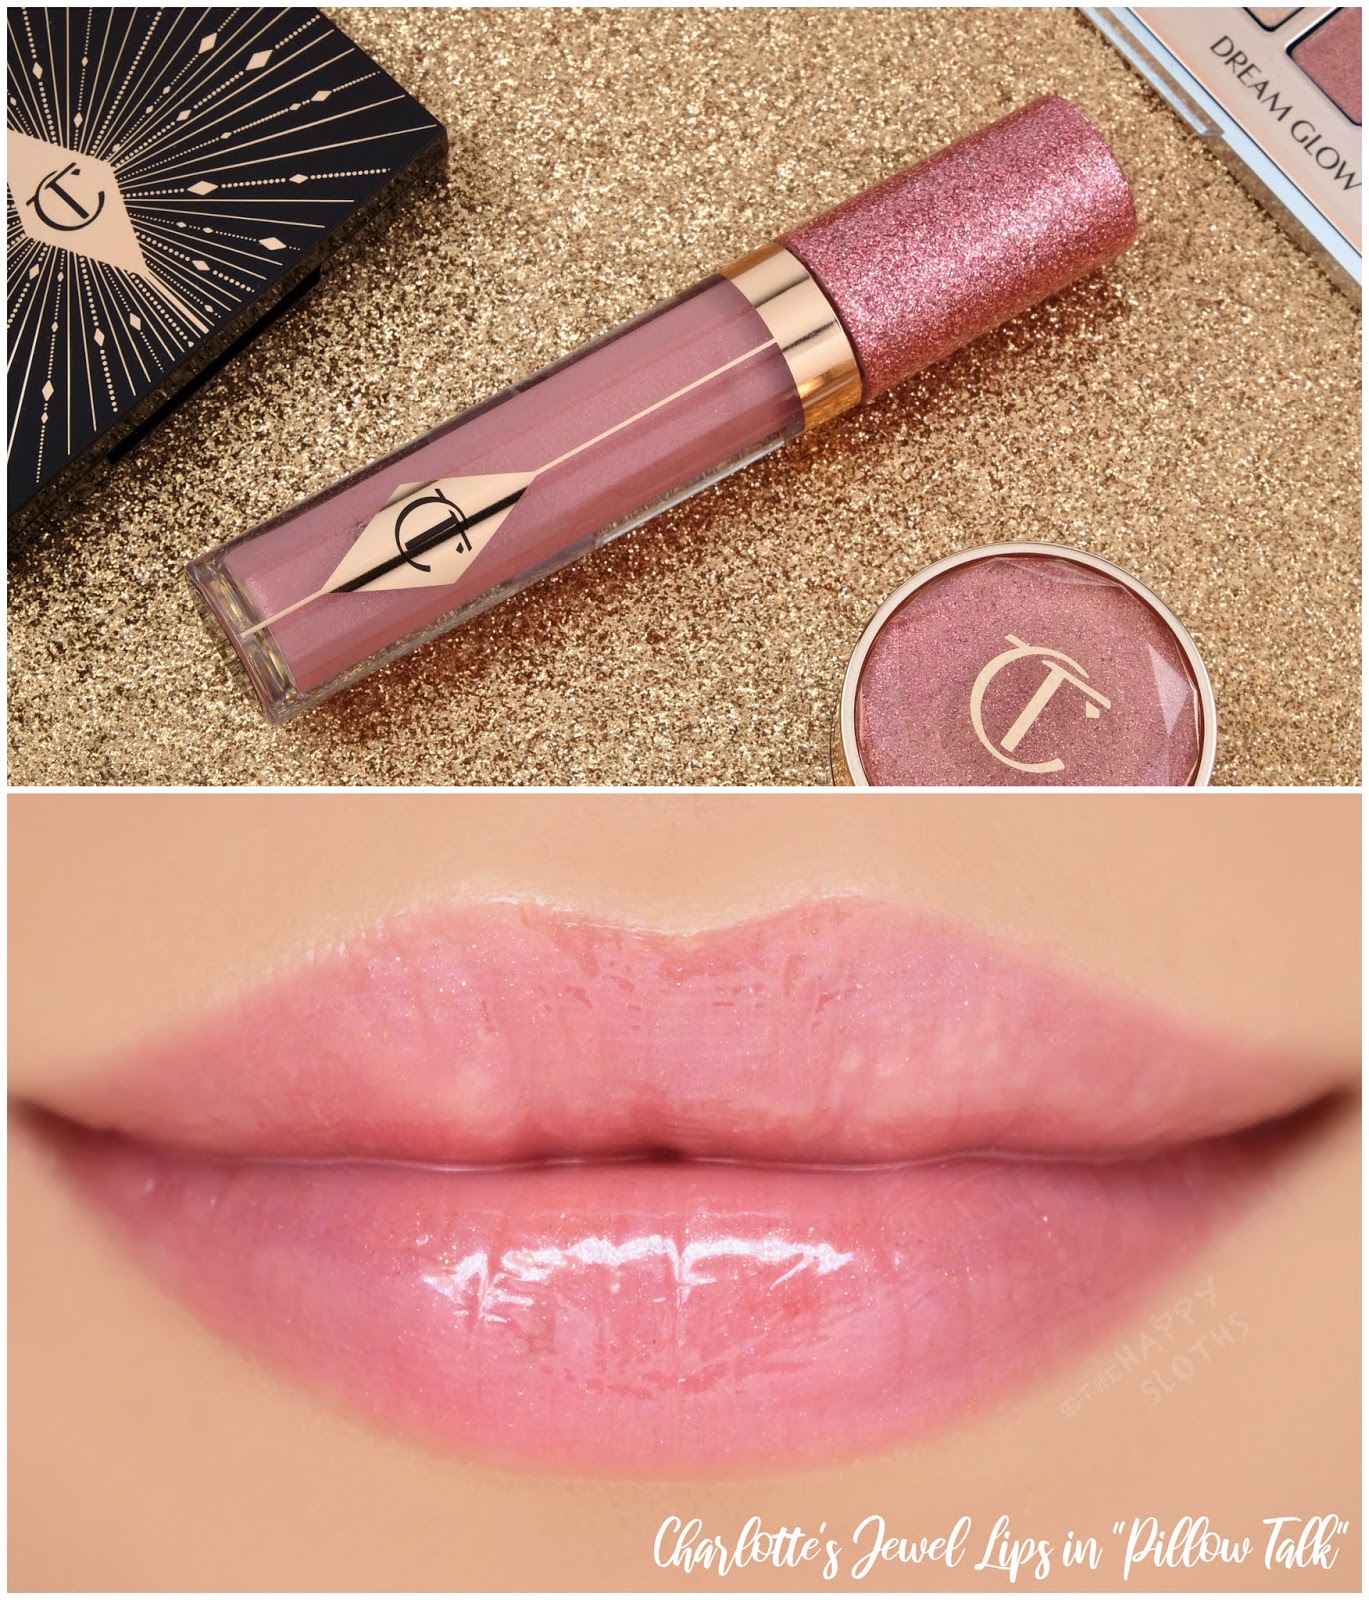 Charlotte Tilbury | Holiday 2020 Charlotte's Jewel Lips in "Pillow Talk": Review and Swatches